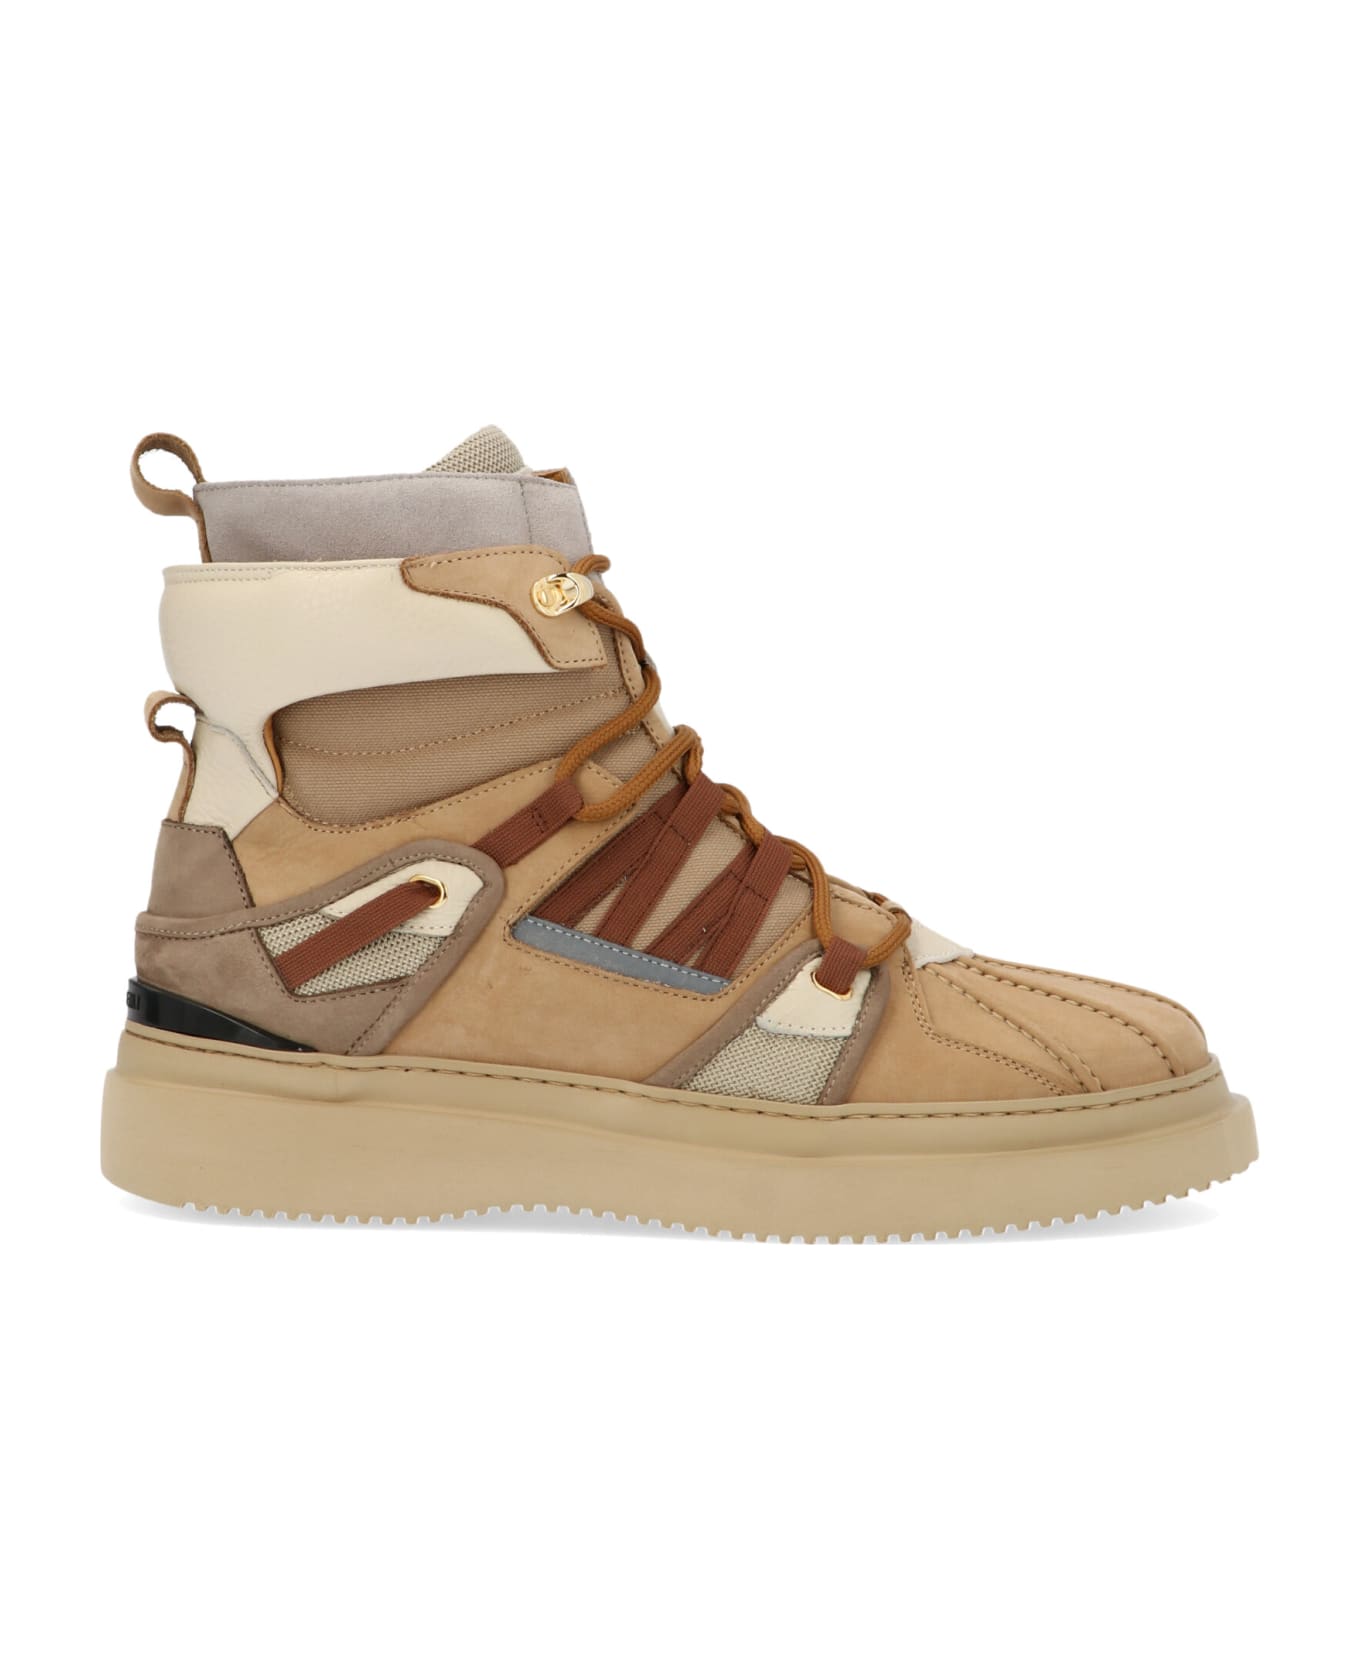 Buscemi 'duck Boot' Shoes | italist